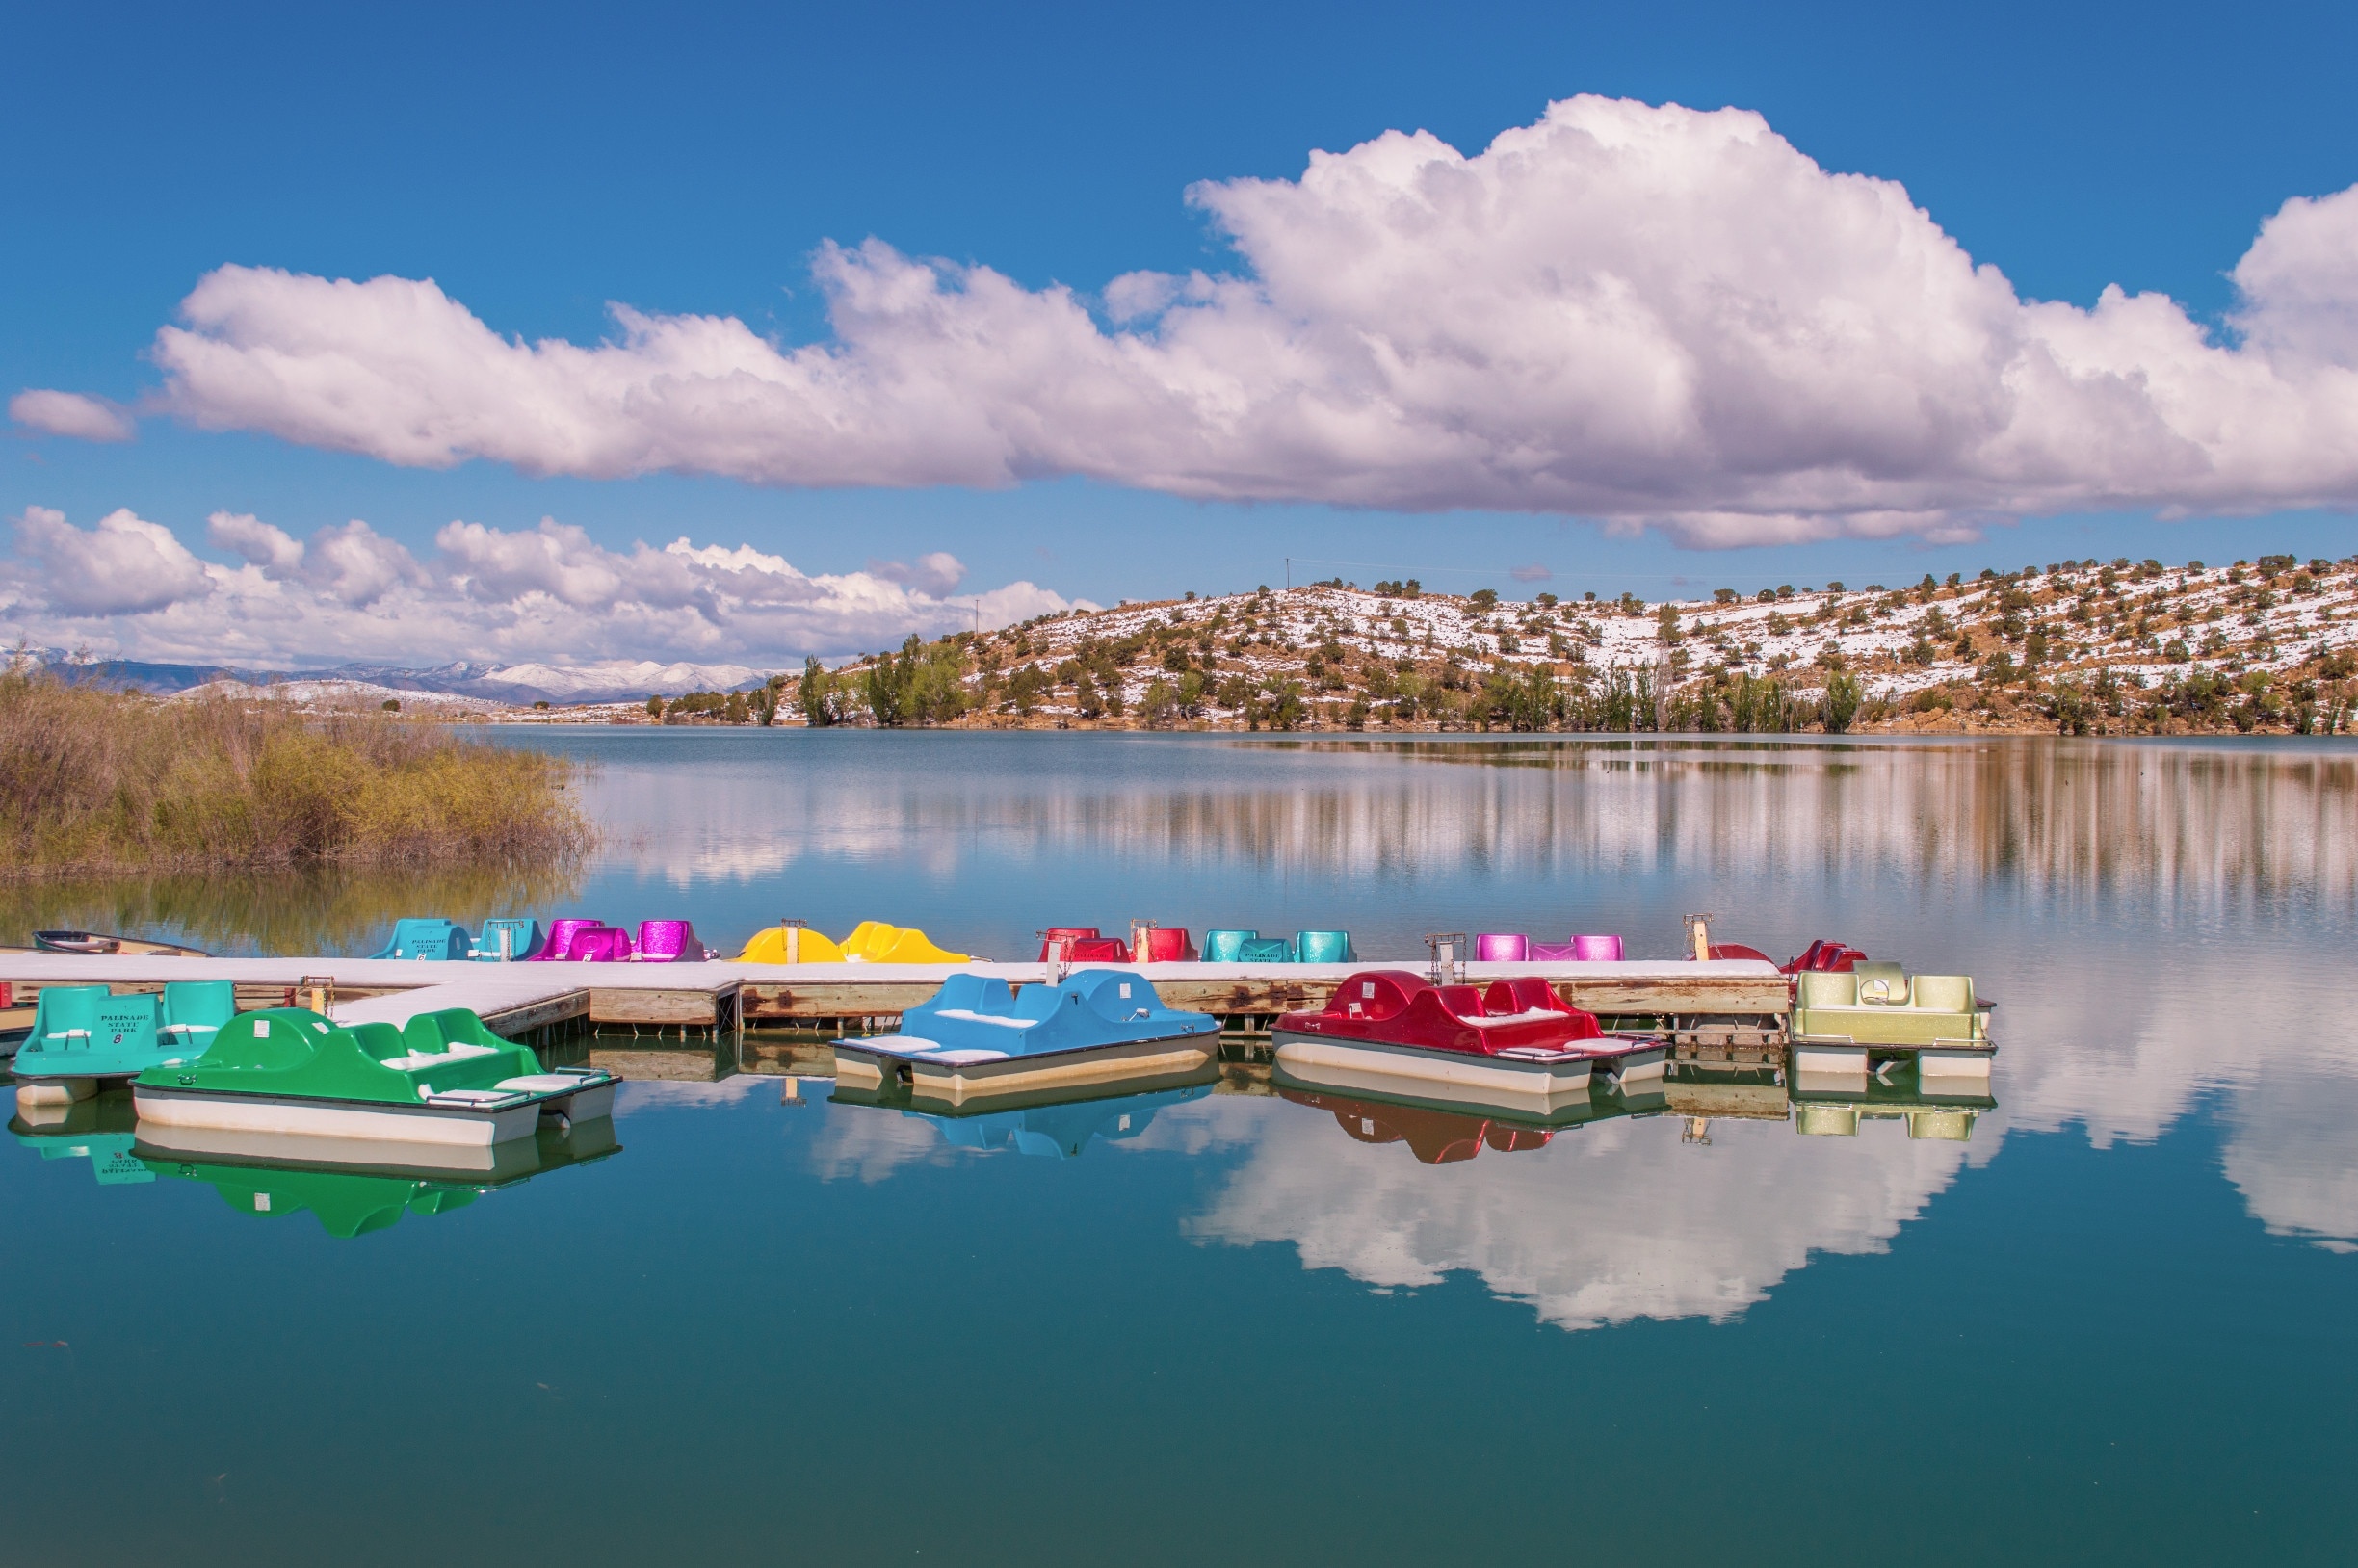 Colorful paddleboats on crystal blue Palisade Lake in Paslisade State Park. We were there in May of 2014, and woke up on Mother's Day to a surprise 9 inches of snow! It had mostly melted by the next day but still provided a pretty contrast to the bright blue sky. This state park offers fishing, camping, golfing, OHV trails, and boat rentals. #utah #palisadelake #snow #lake